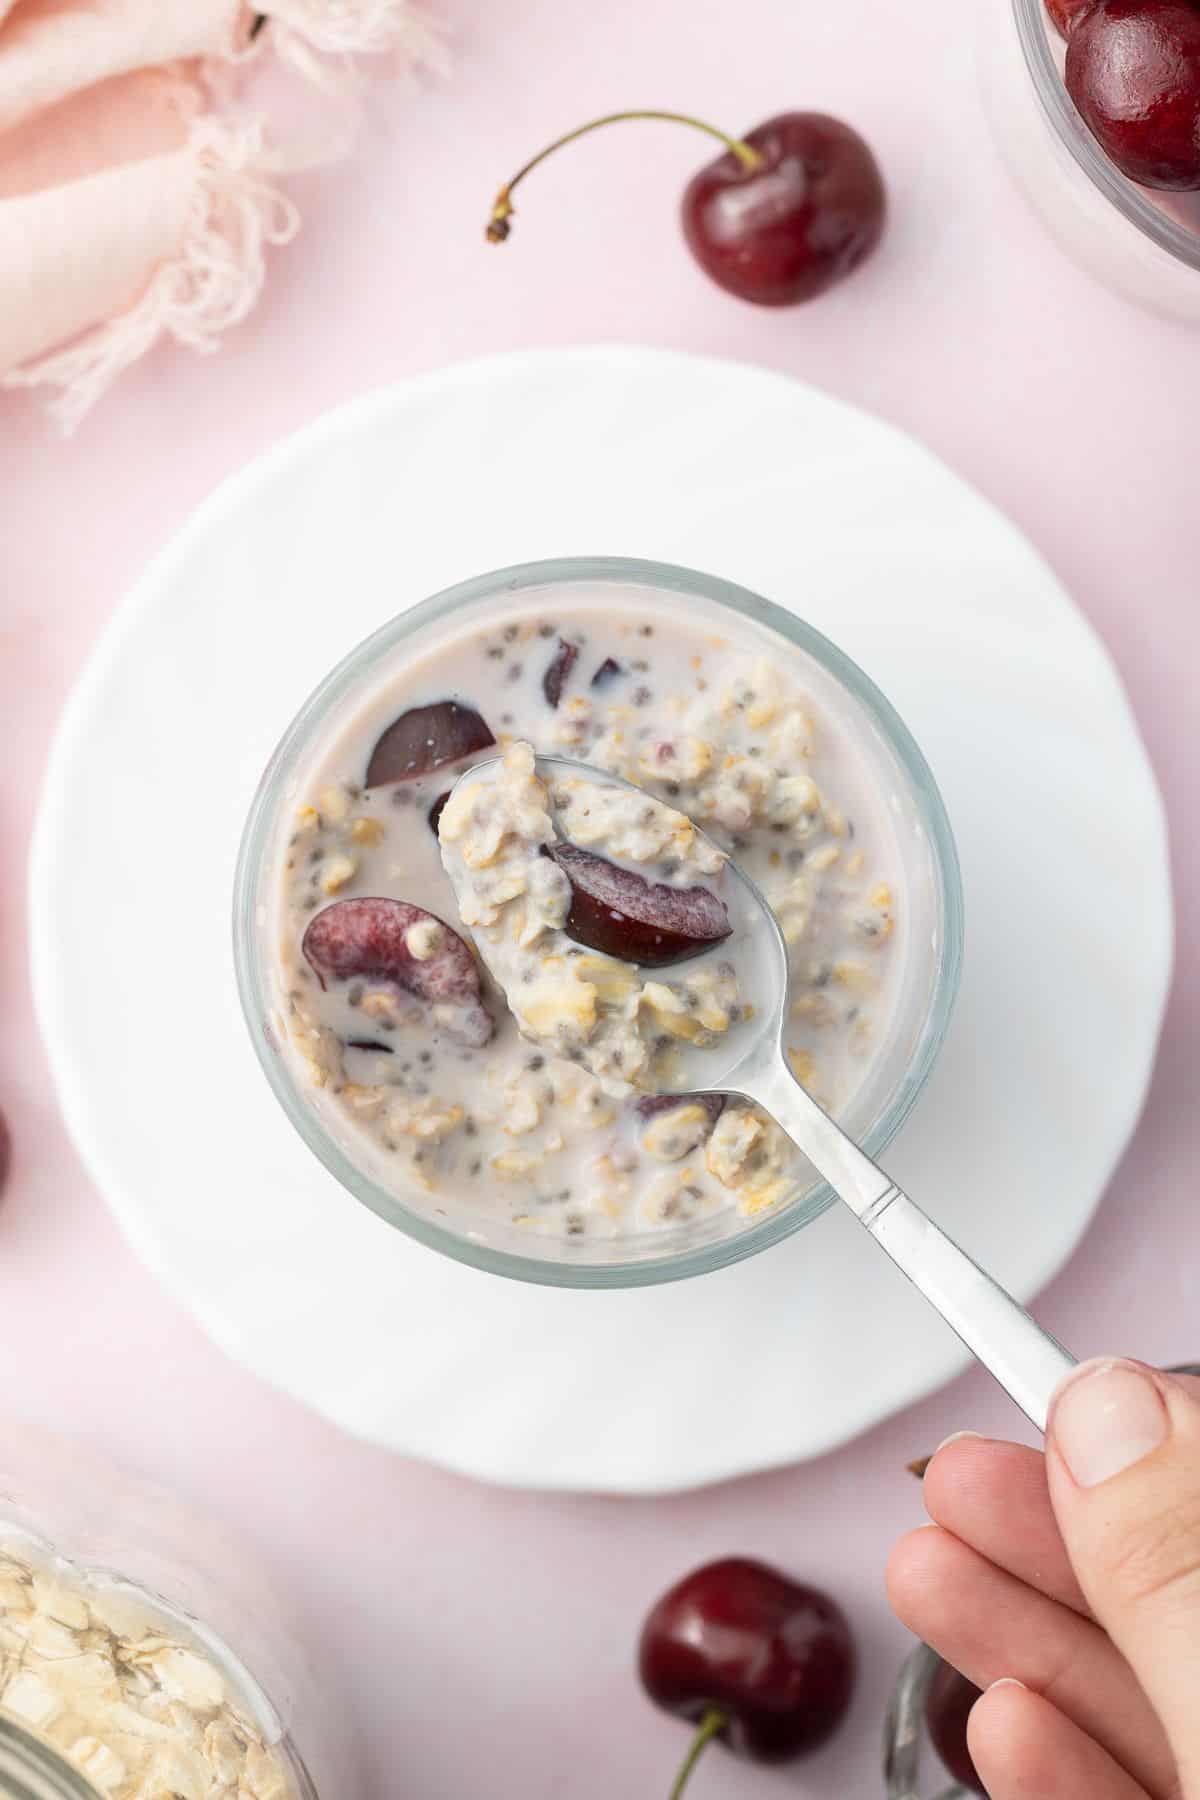 Spoon dipping in to glass jar of overnight oats.